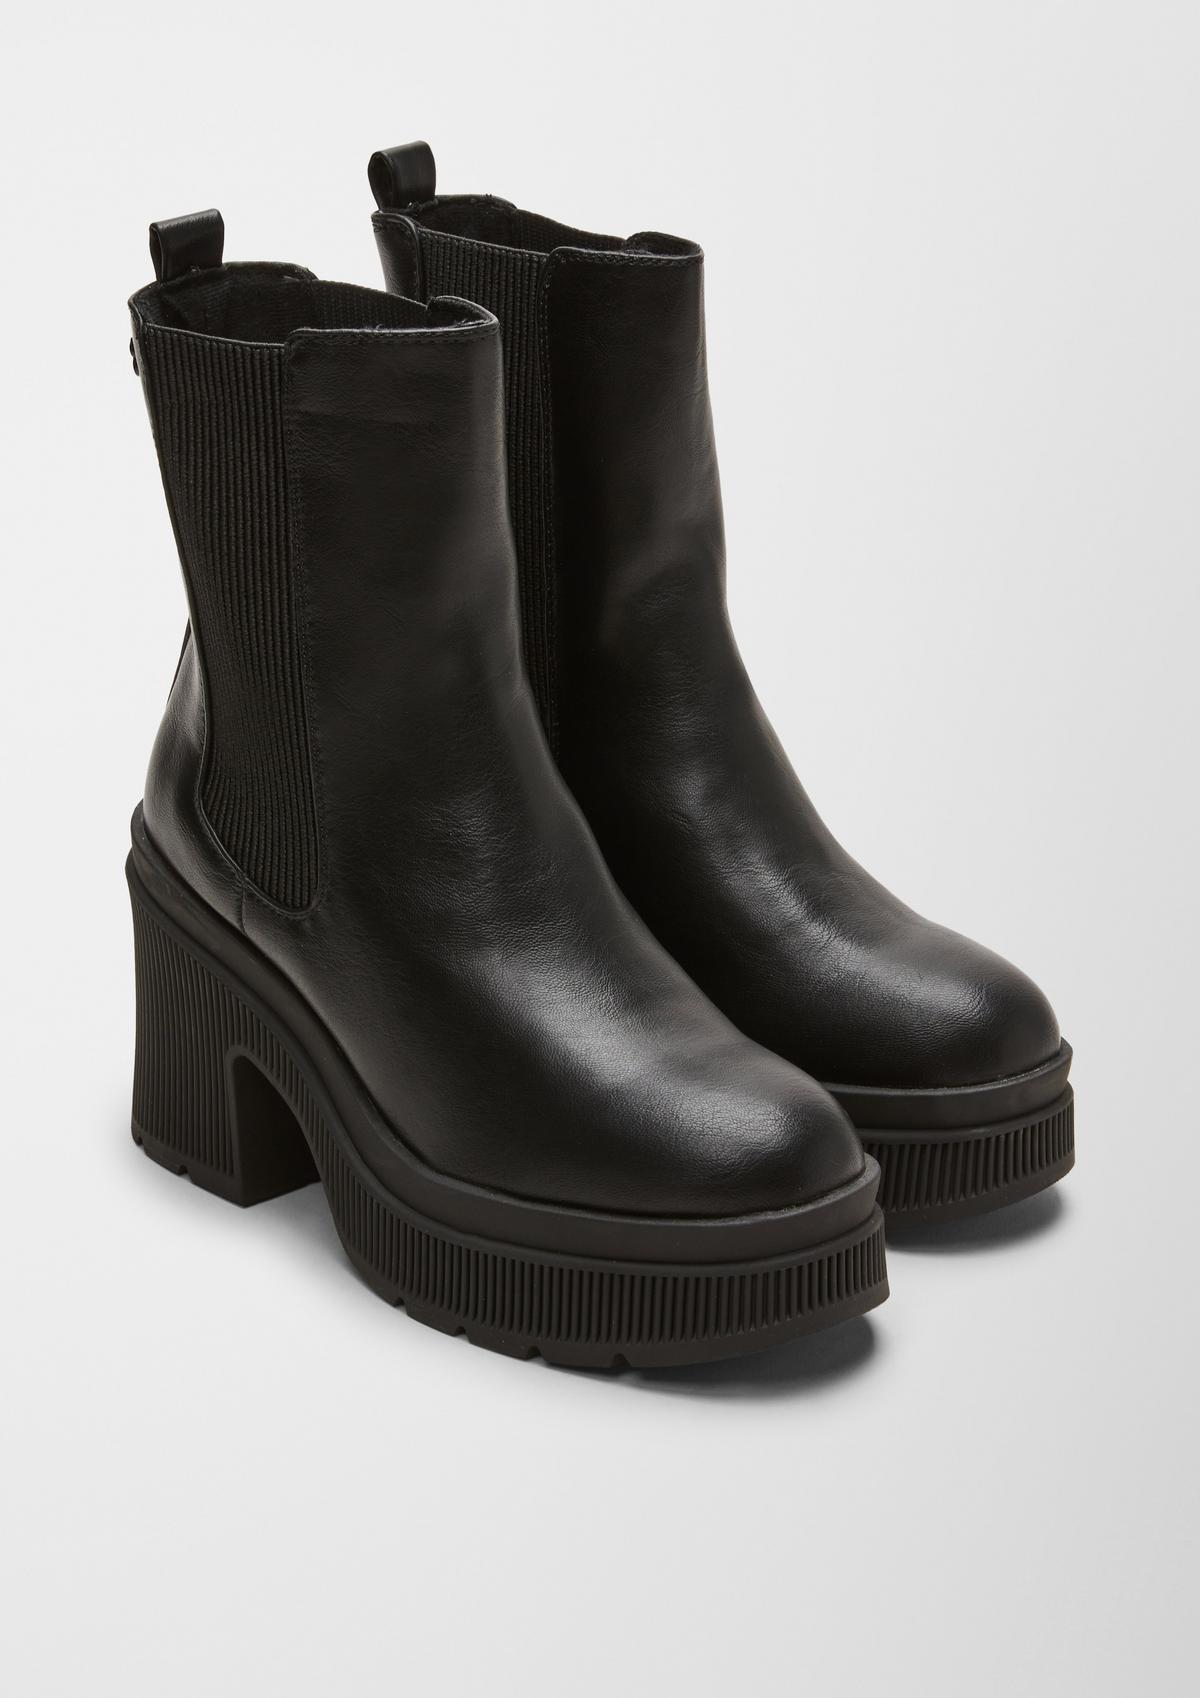 s.Oliver Boots mit Plateausohle